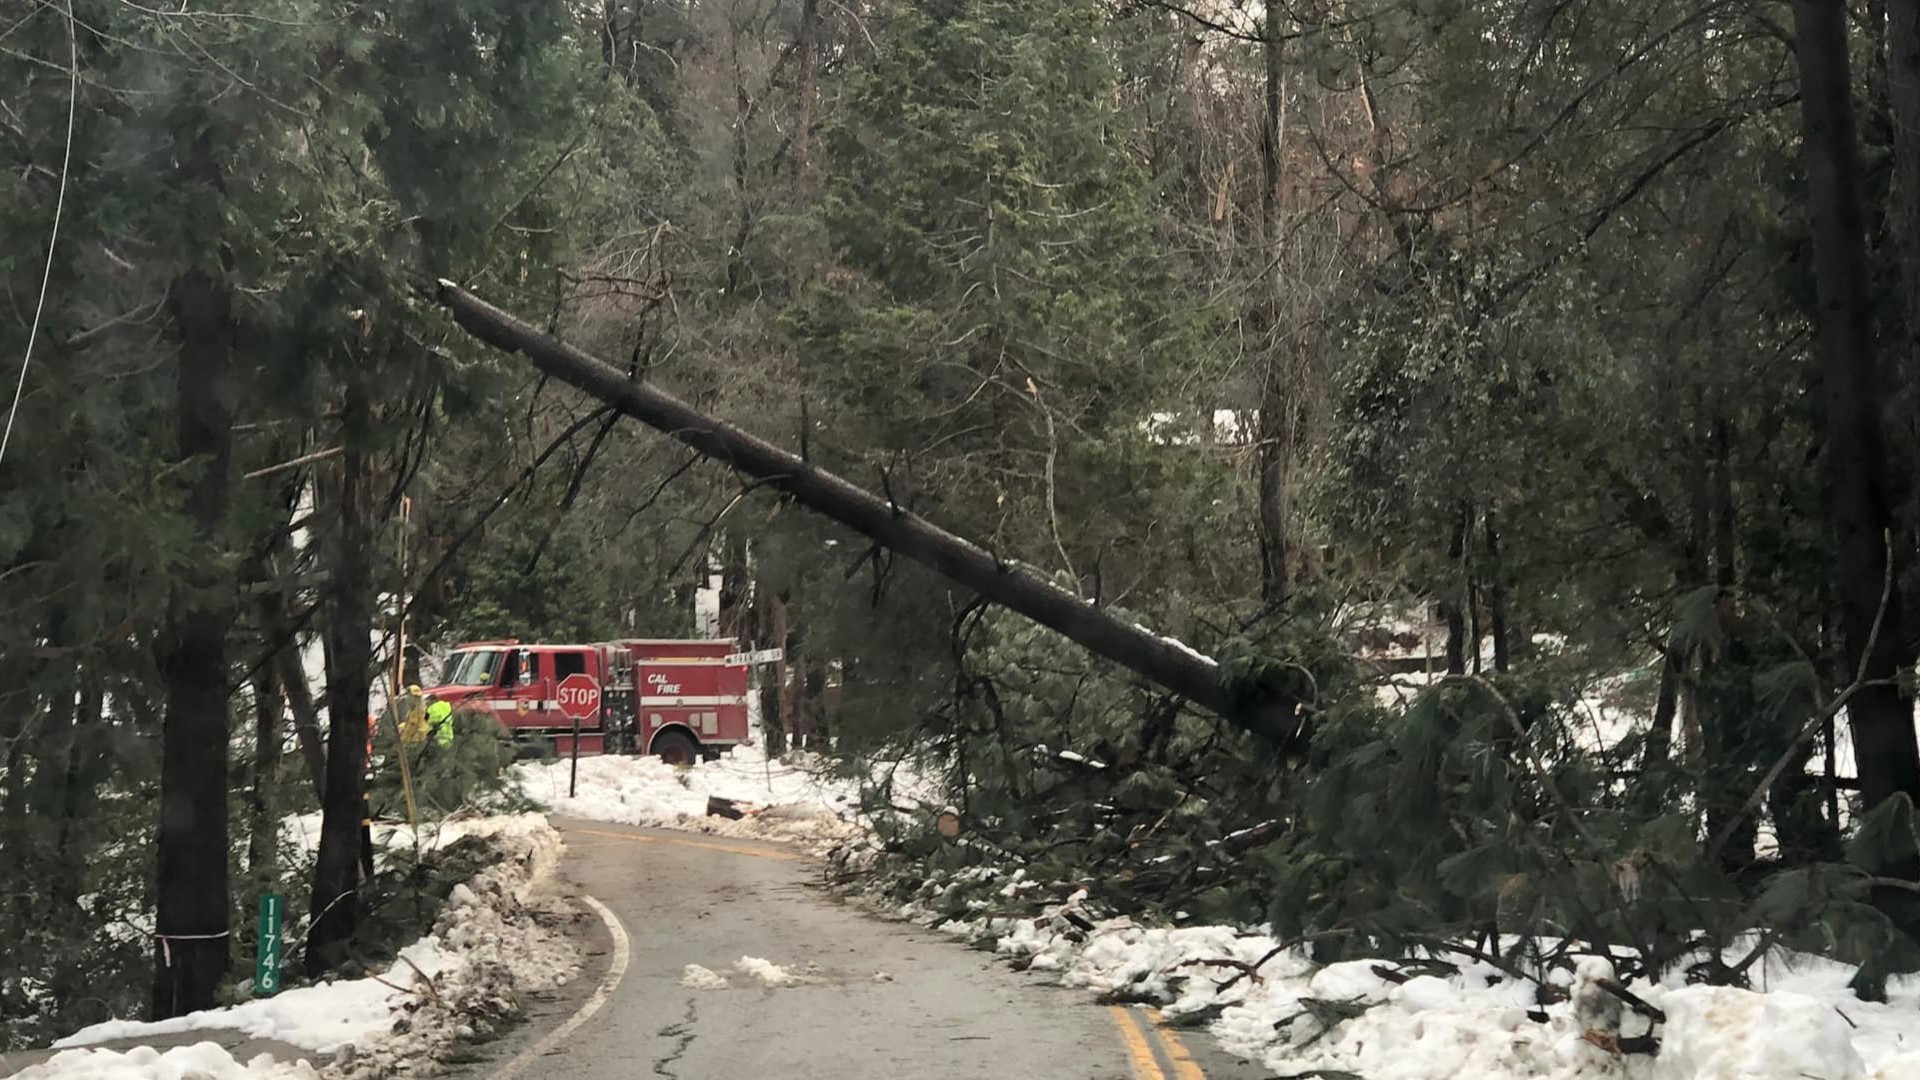 About 33,000 customers are still without power in El Dorado, Nevada, Placer, Sierra, Amador and Calaveras counties as of Sunday afternoon.